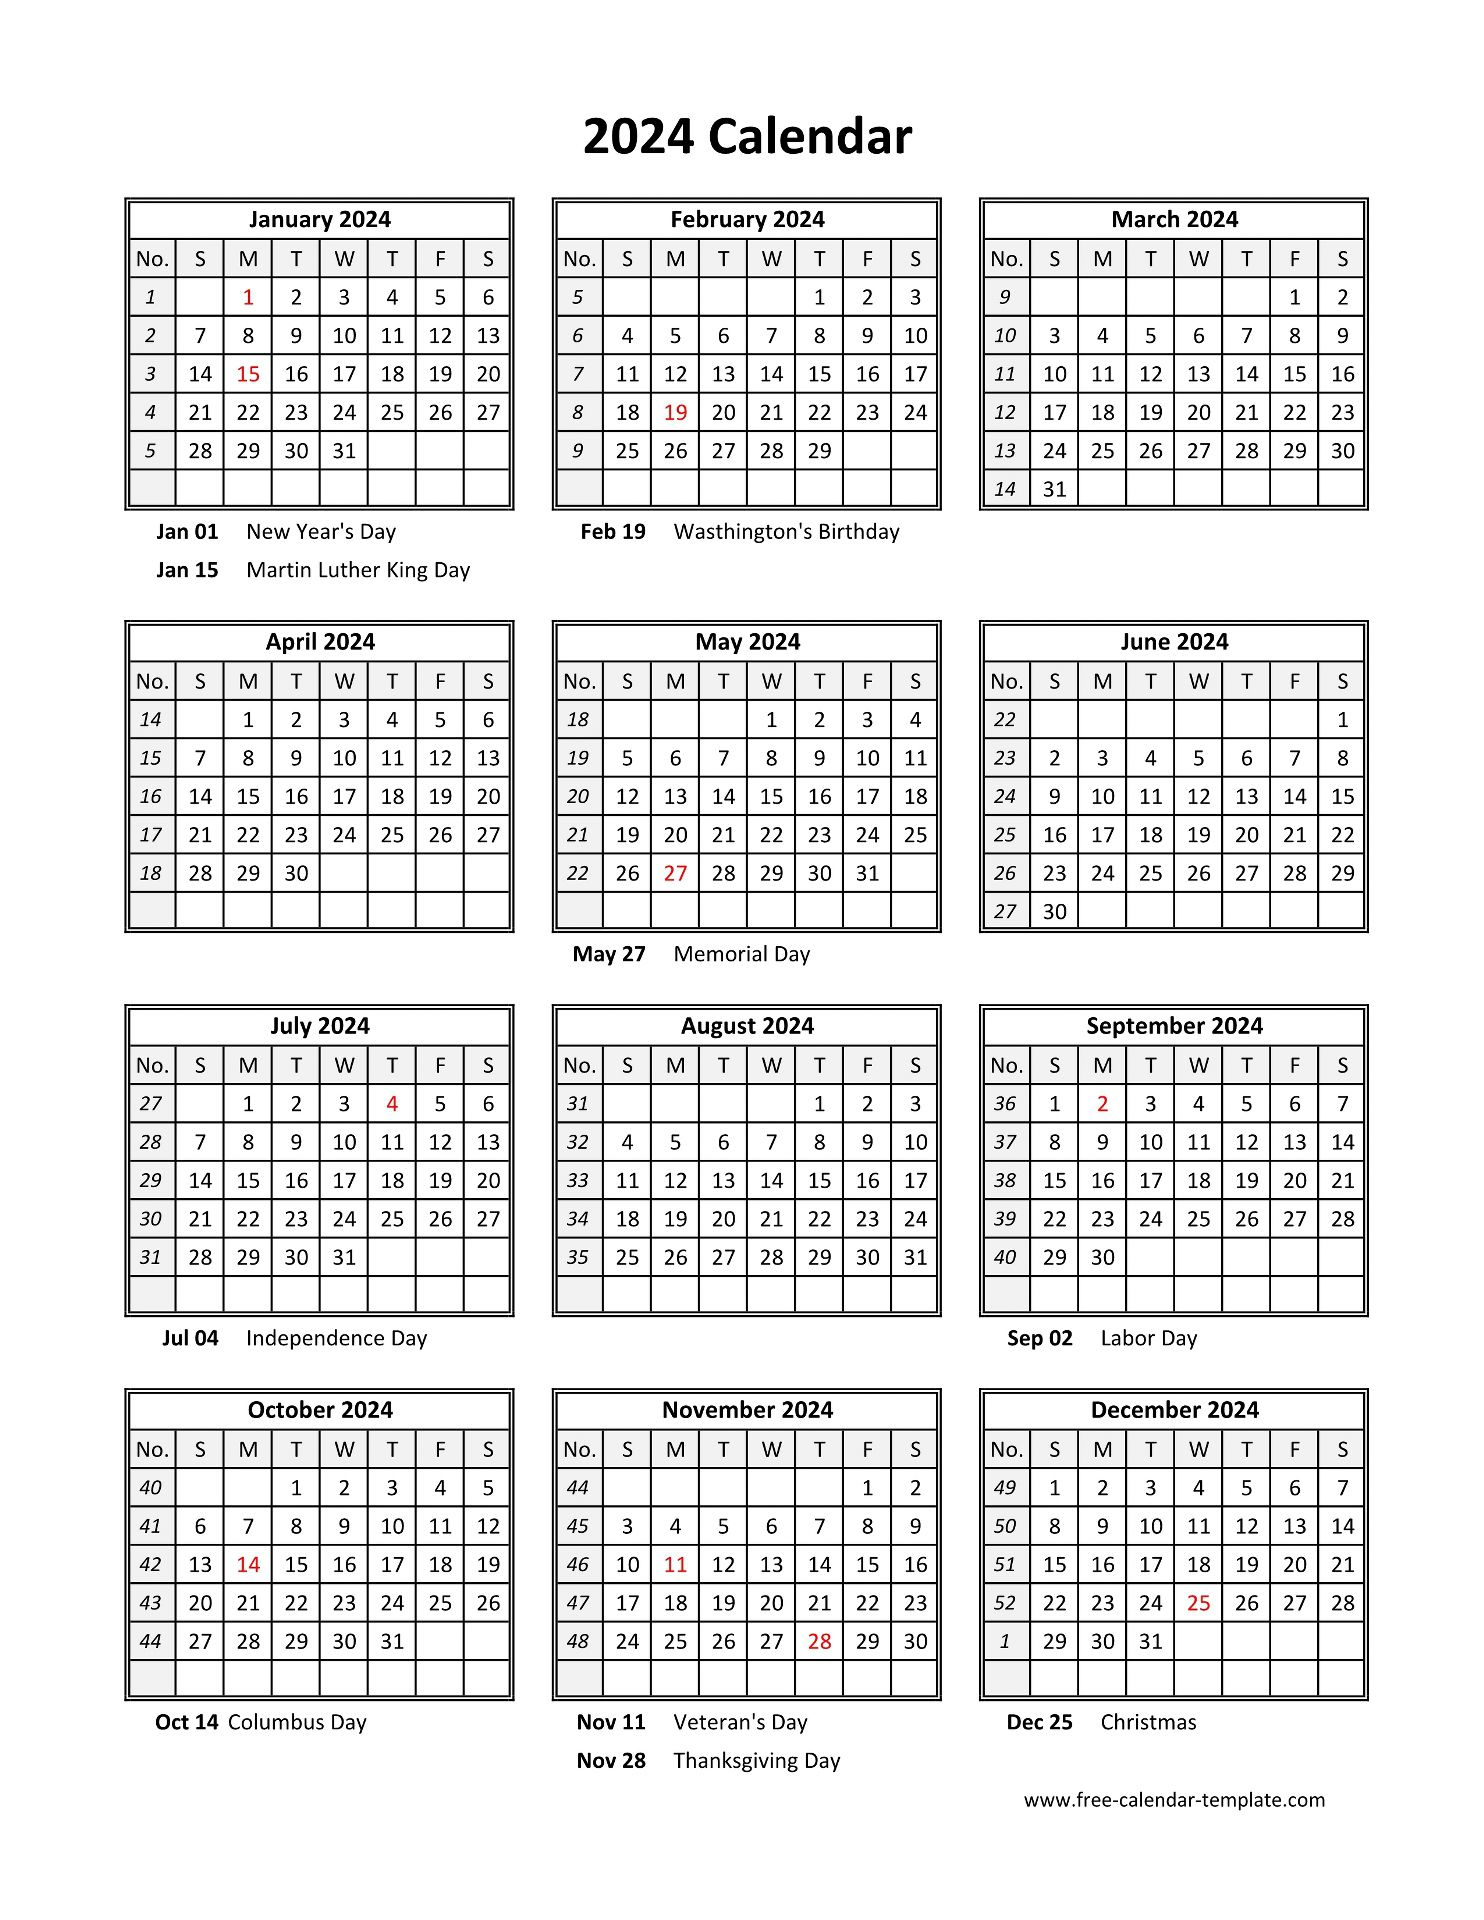 Yearly Printable Calendar 2024 With Holidays | Free-Calendar | Printable 2024 Calendar One Page Word